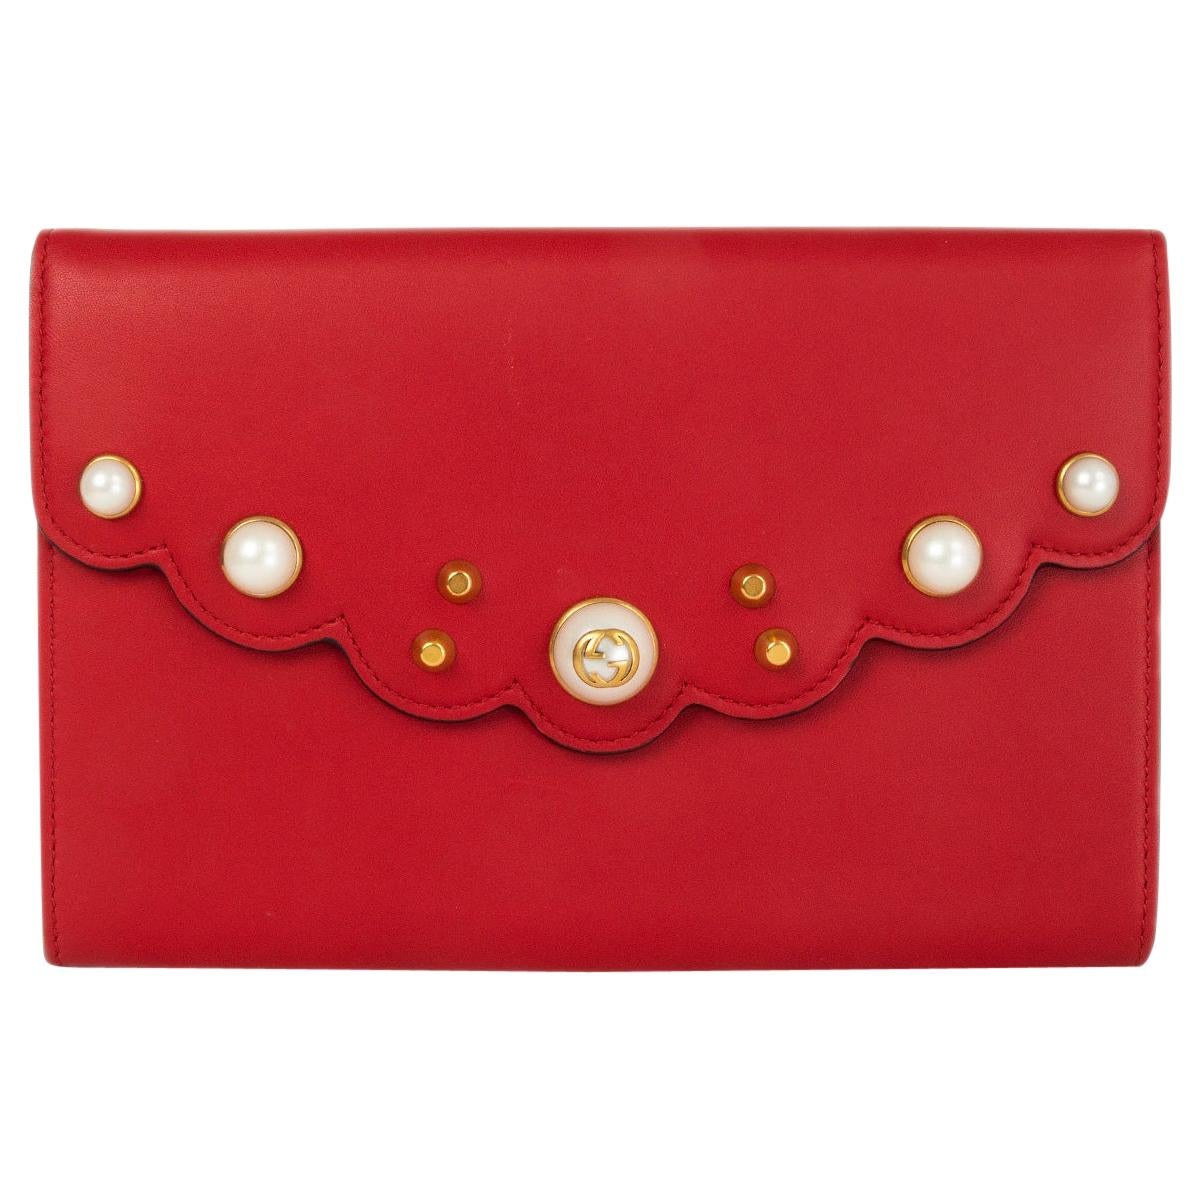 GUCCI Hibiscus red leather PEONY PEARL EMBELLISHED Clutch Bag